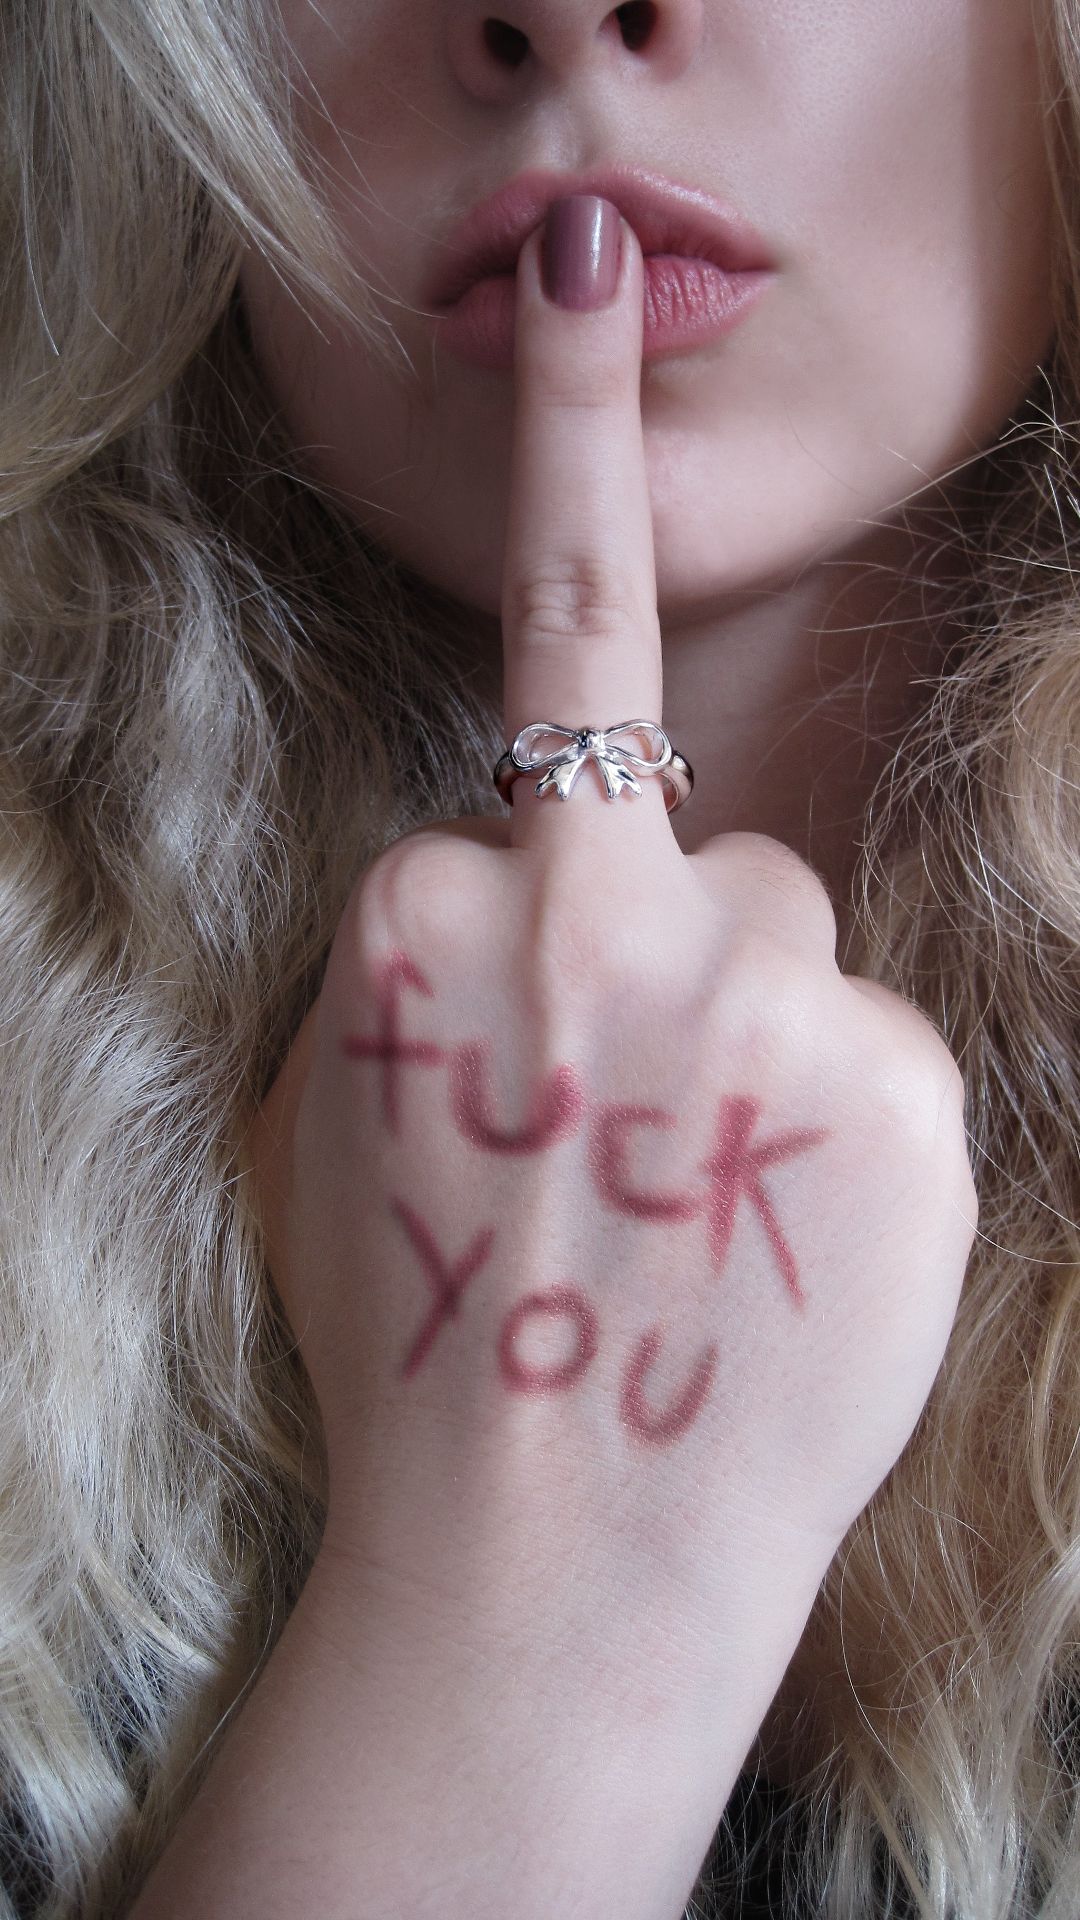 Middle Finger Wallpaper Pictures